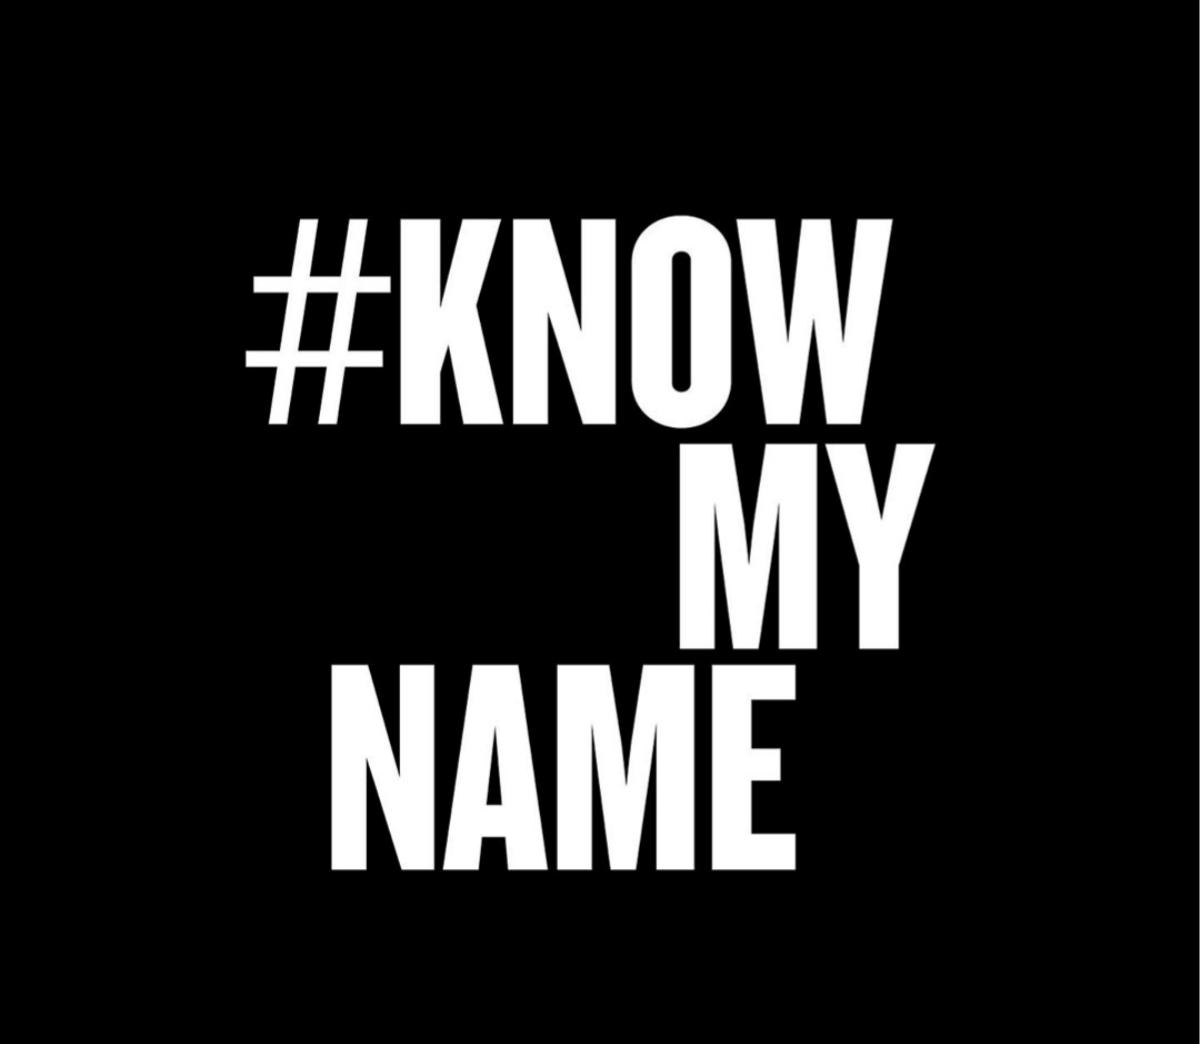 Know My Name, Campaign for Gender Equality